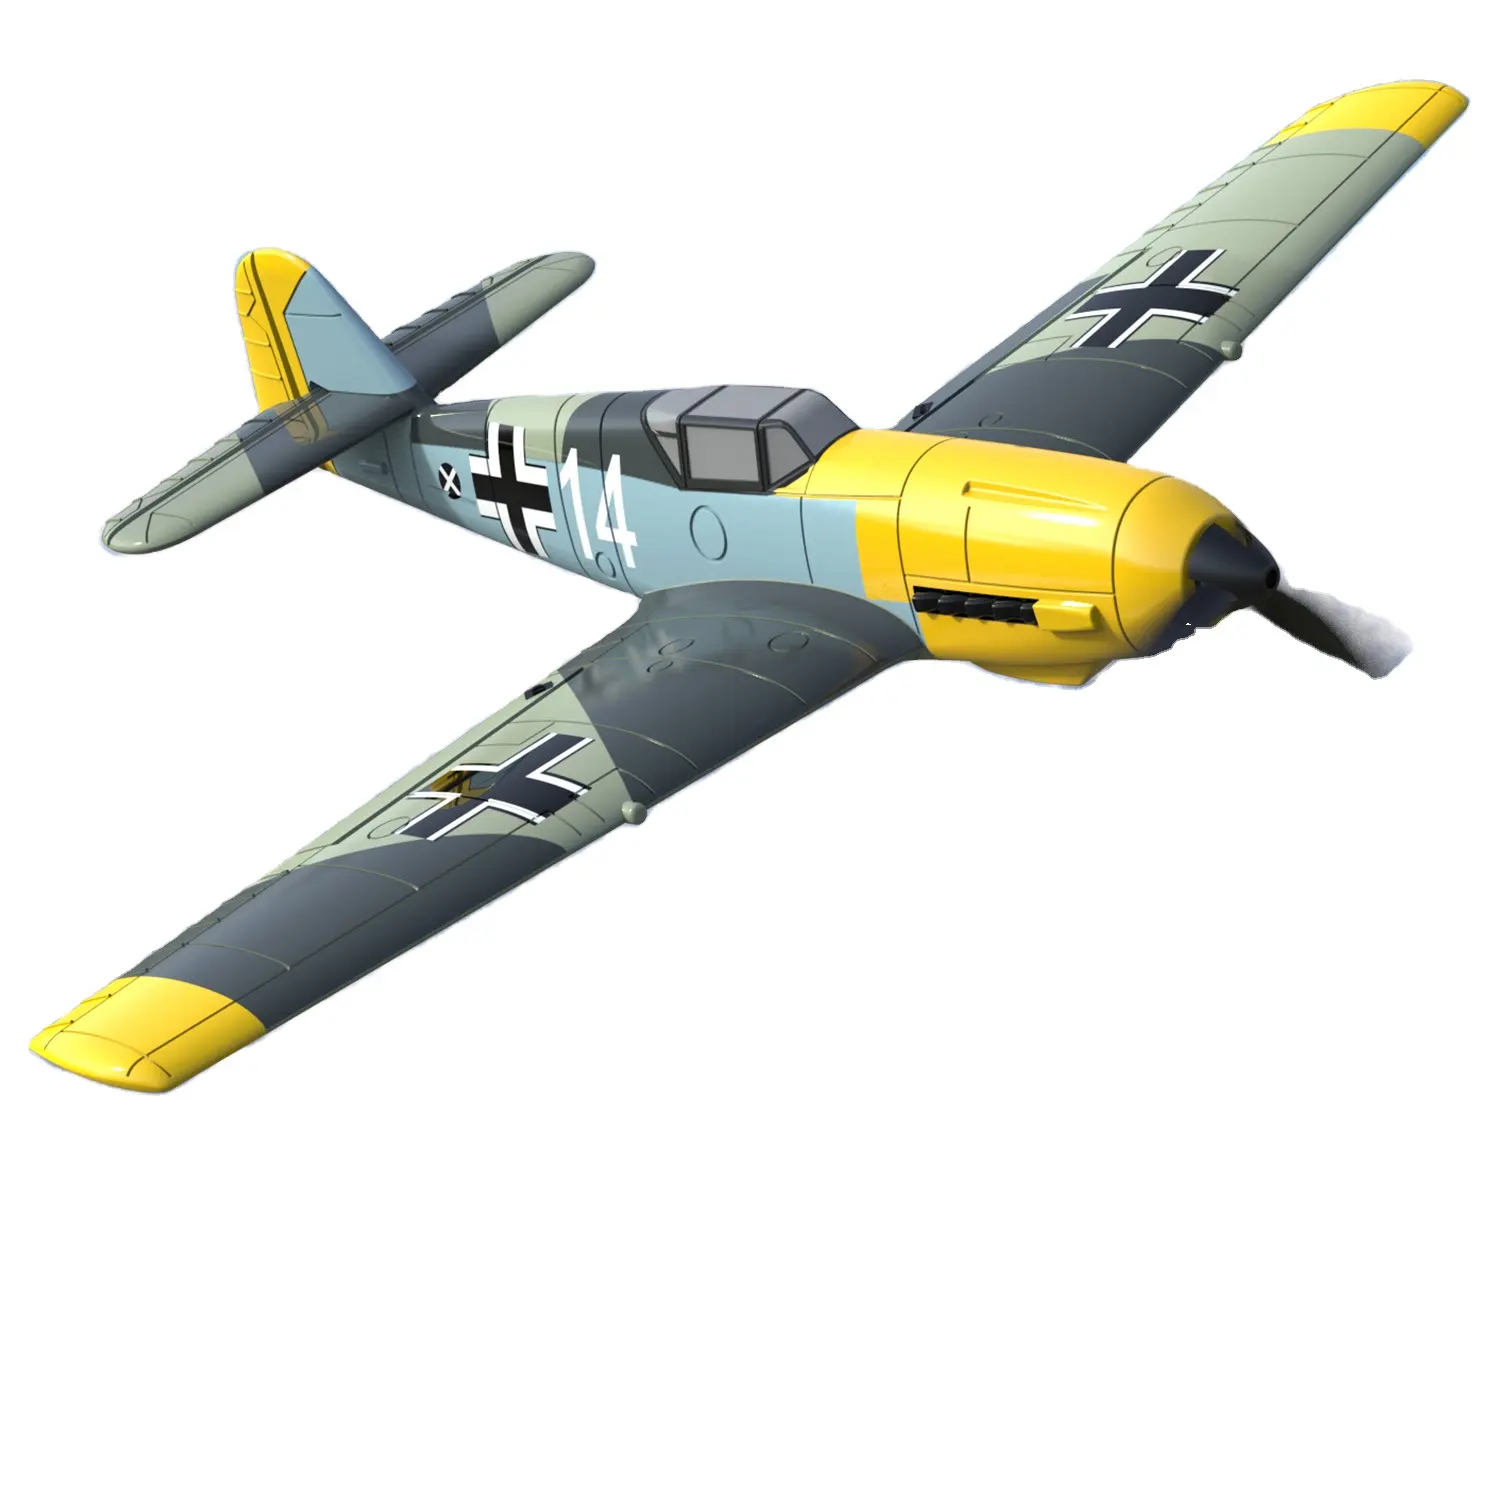 Epp Aerobatic Flight Rc Model Remote Control Airplane 2.4ghz Outdoor Professional Aircraft Toys For Children Adult Play Game